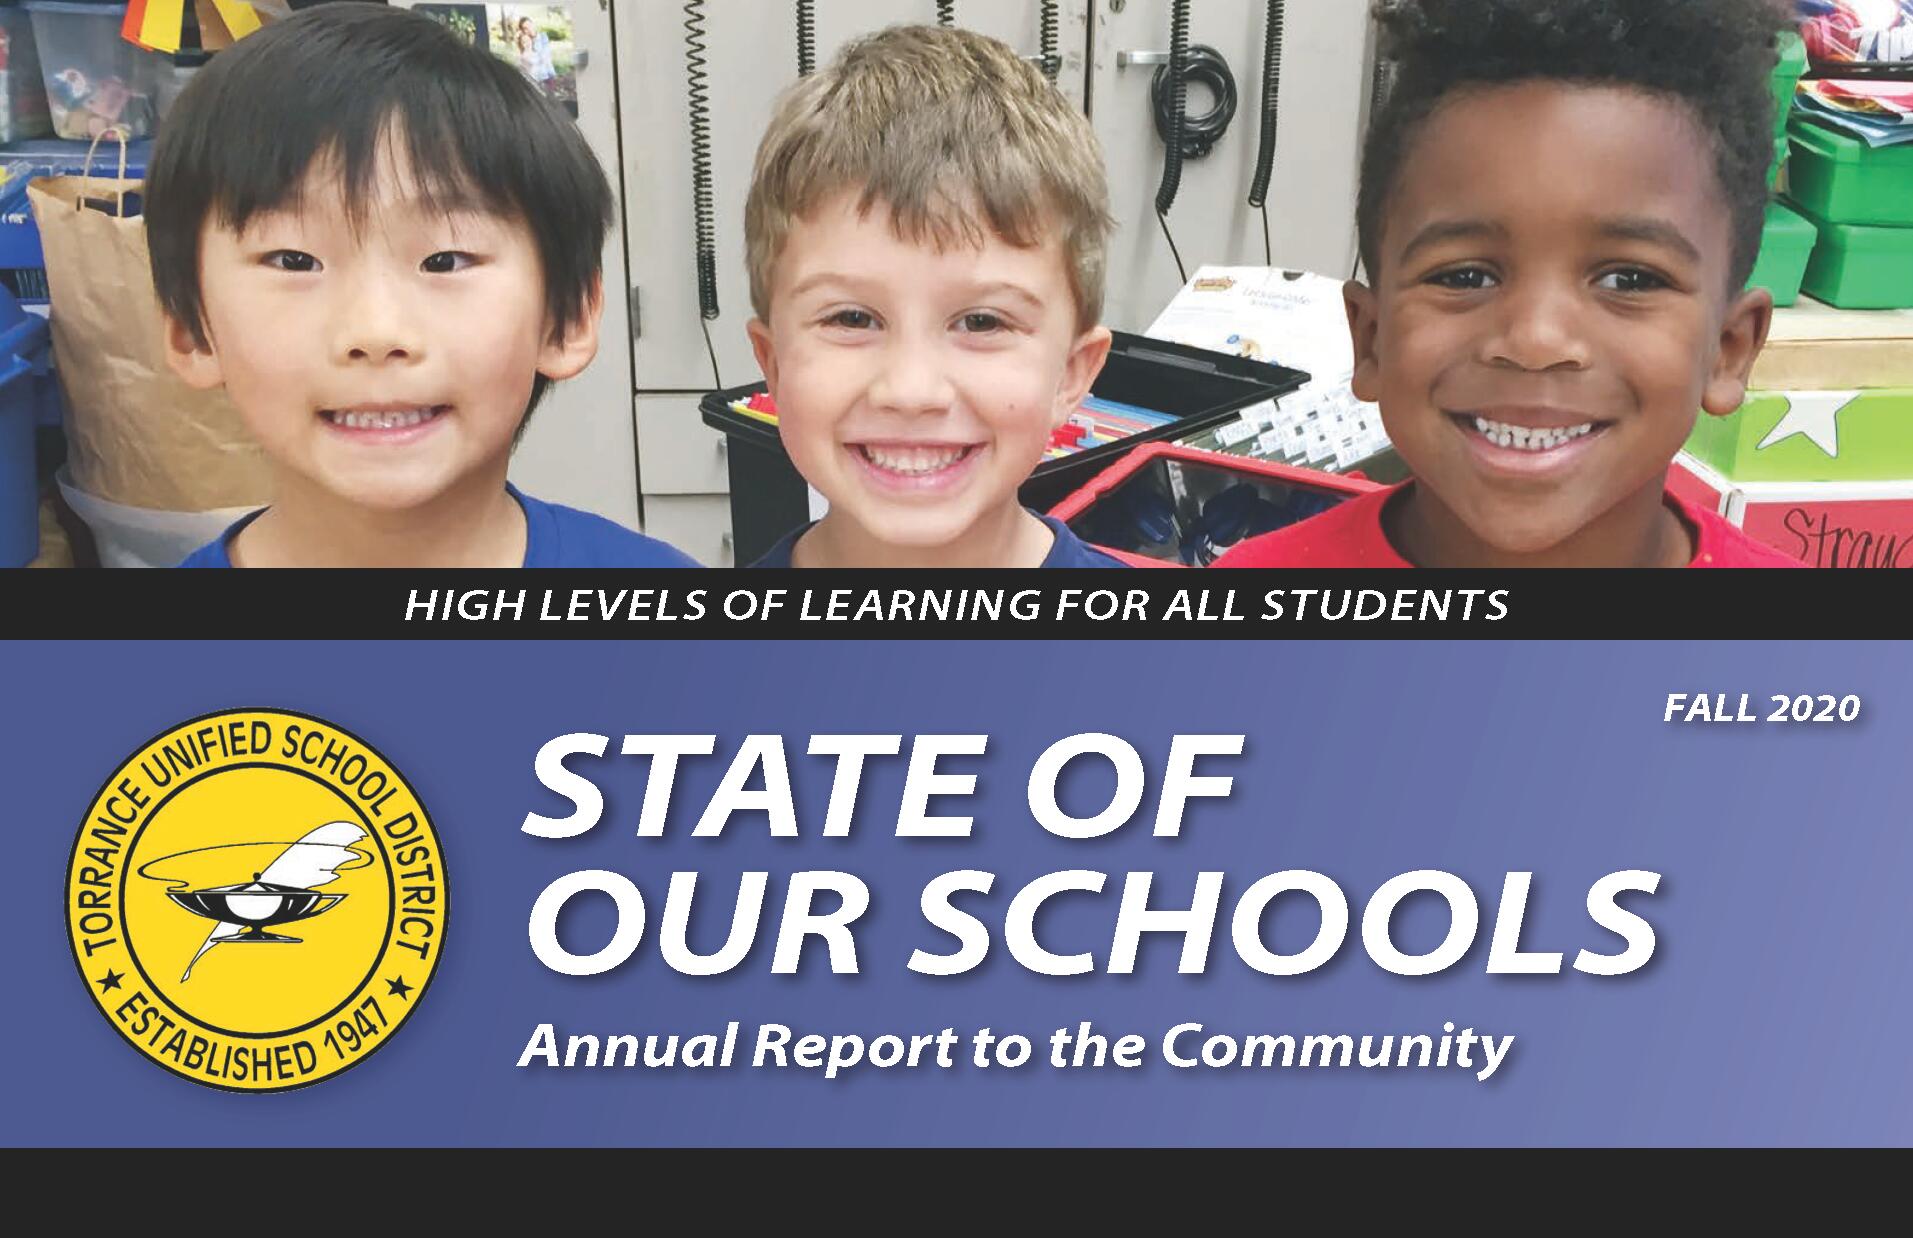 State of Our Schools Annual Report to the Community